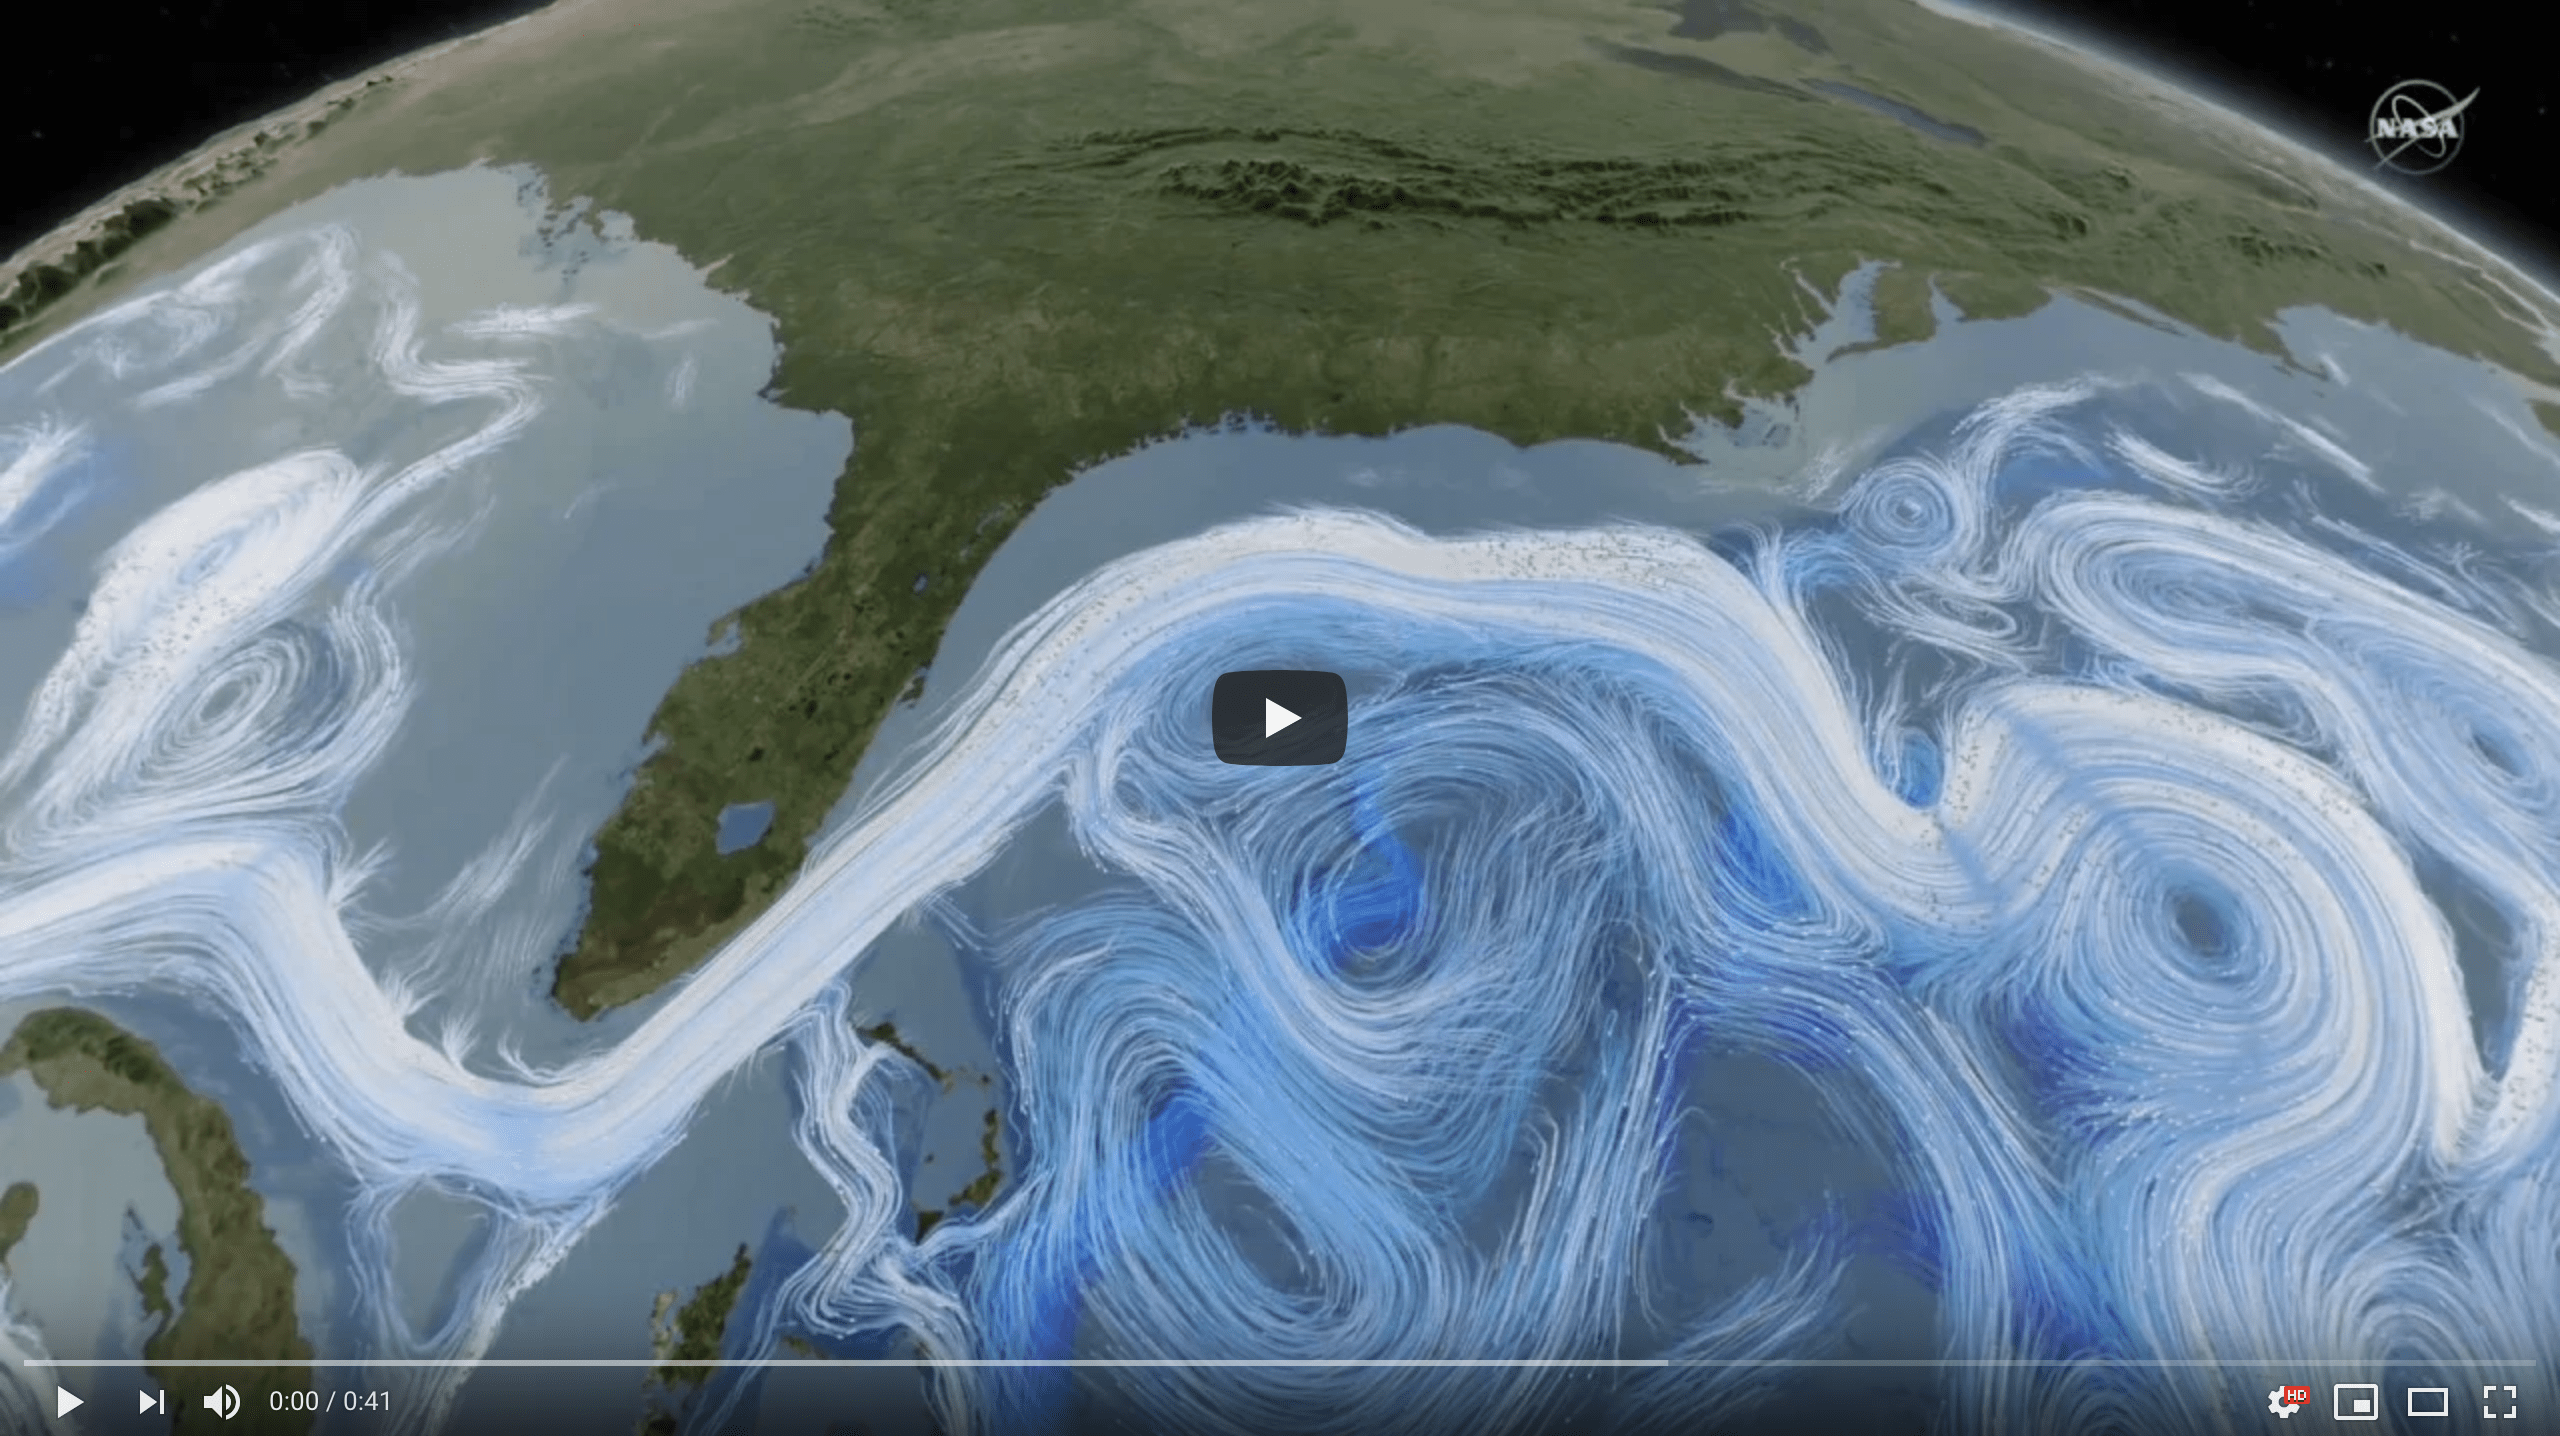 Nasa Video cover image: Ocean circulation plays an important role in absorbing carbon from the atmosphere. Credit: NASA's Goddard Space Flight Center